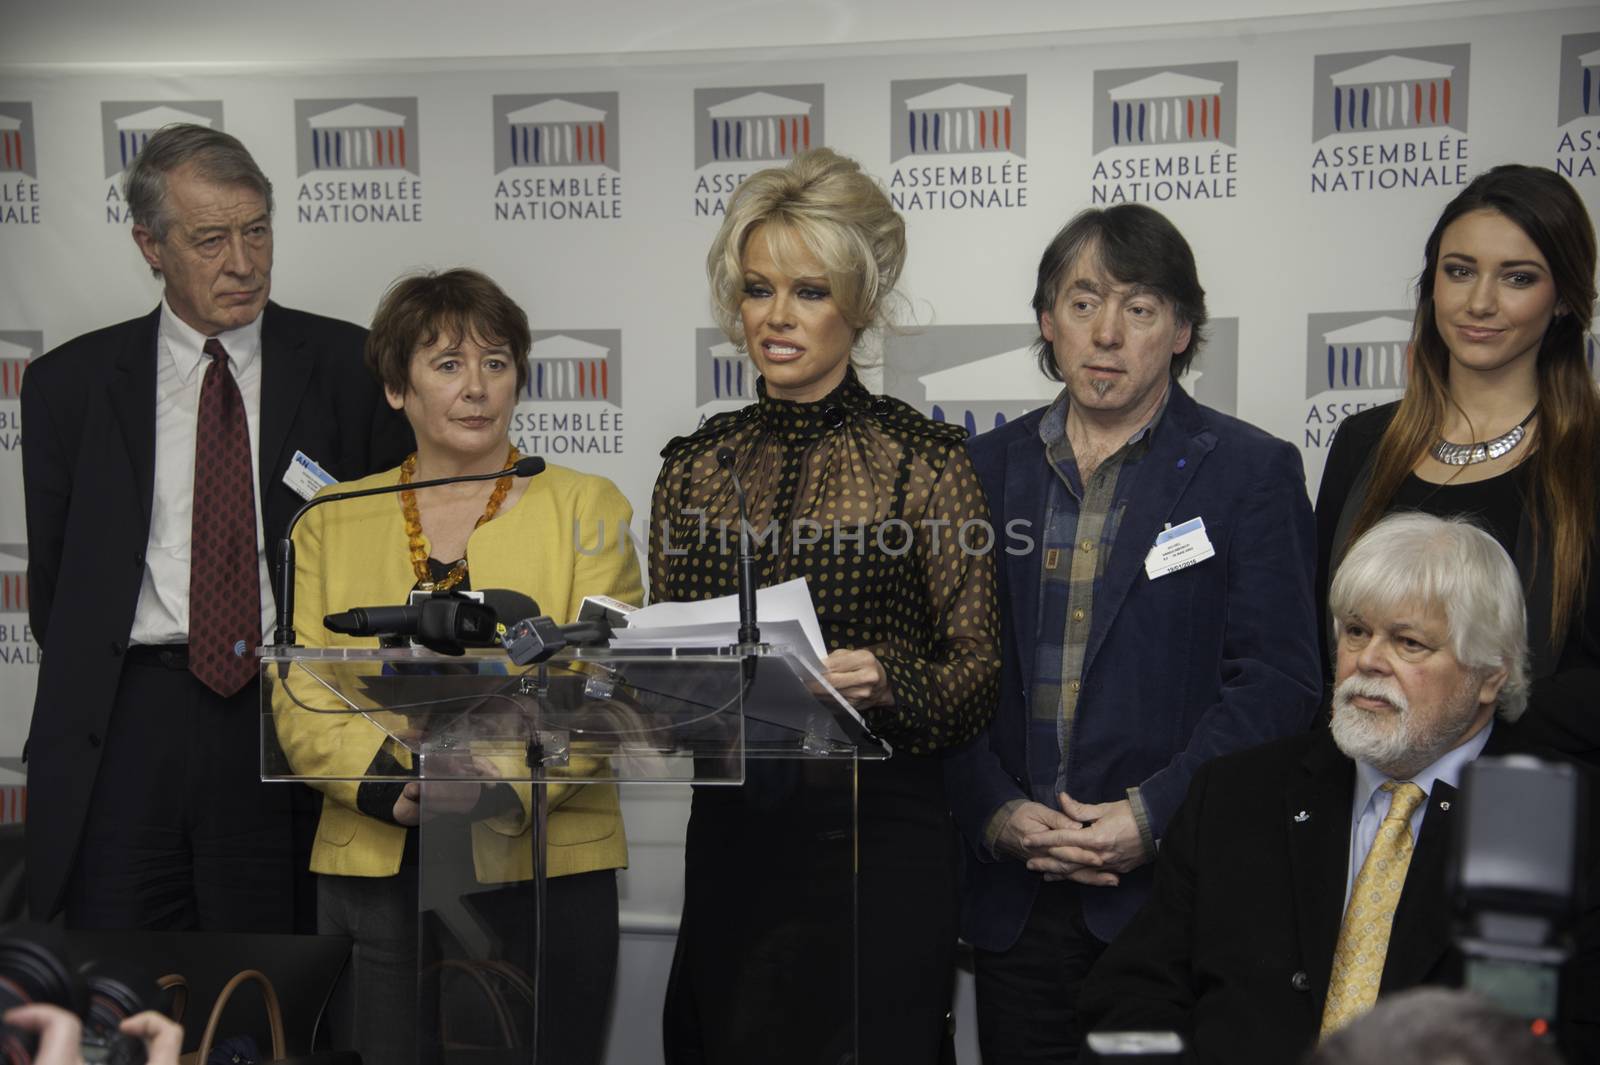 FRANCE, Paris : US actress Pamela Anderson gives a press conference after attending a session of questions to the Government at the French National Assembly in Paris on January 19, 2016.Former Baywatch star Pamela Anderson set feathers flying in the French parliament when she turned up to support a ban on force-feeding ducks and geese to make foie gras 